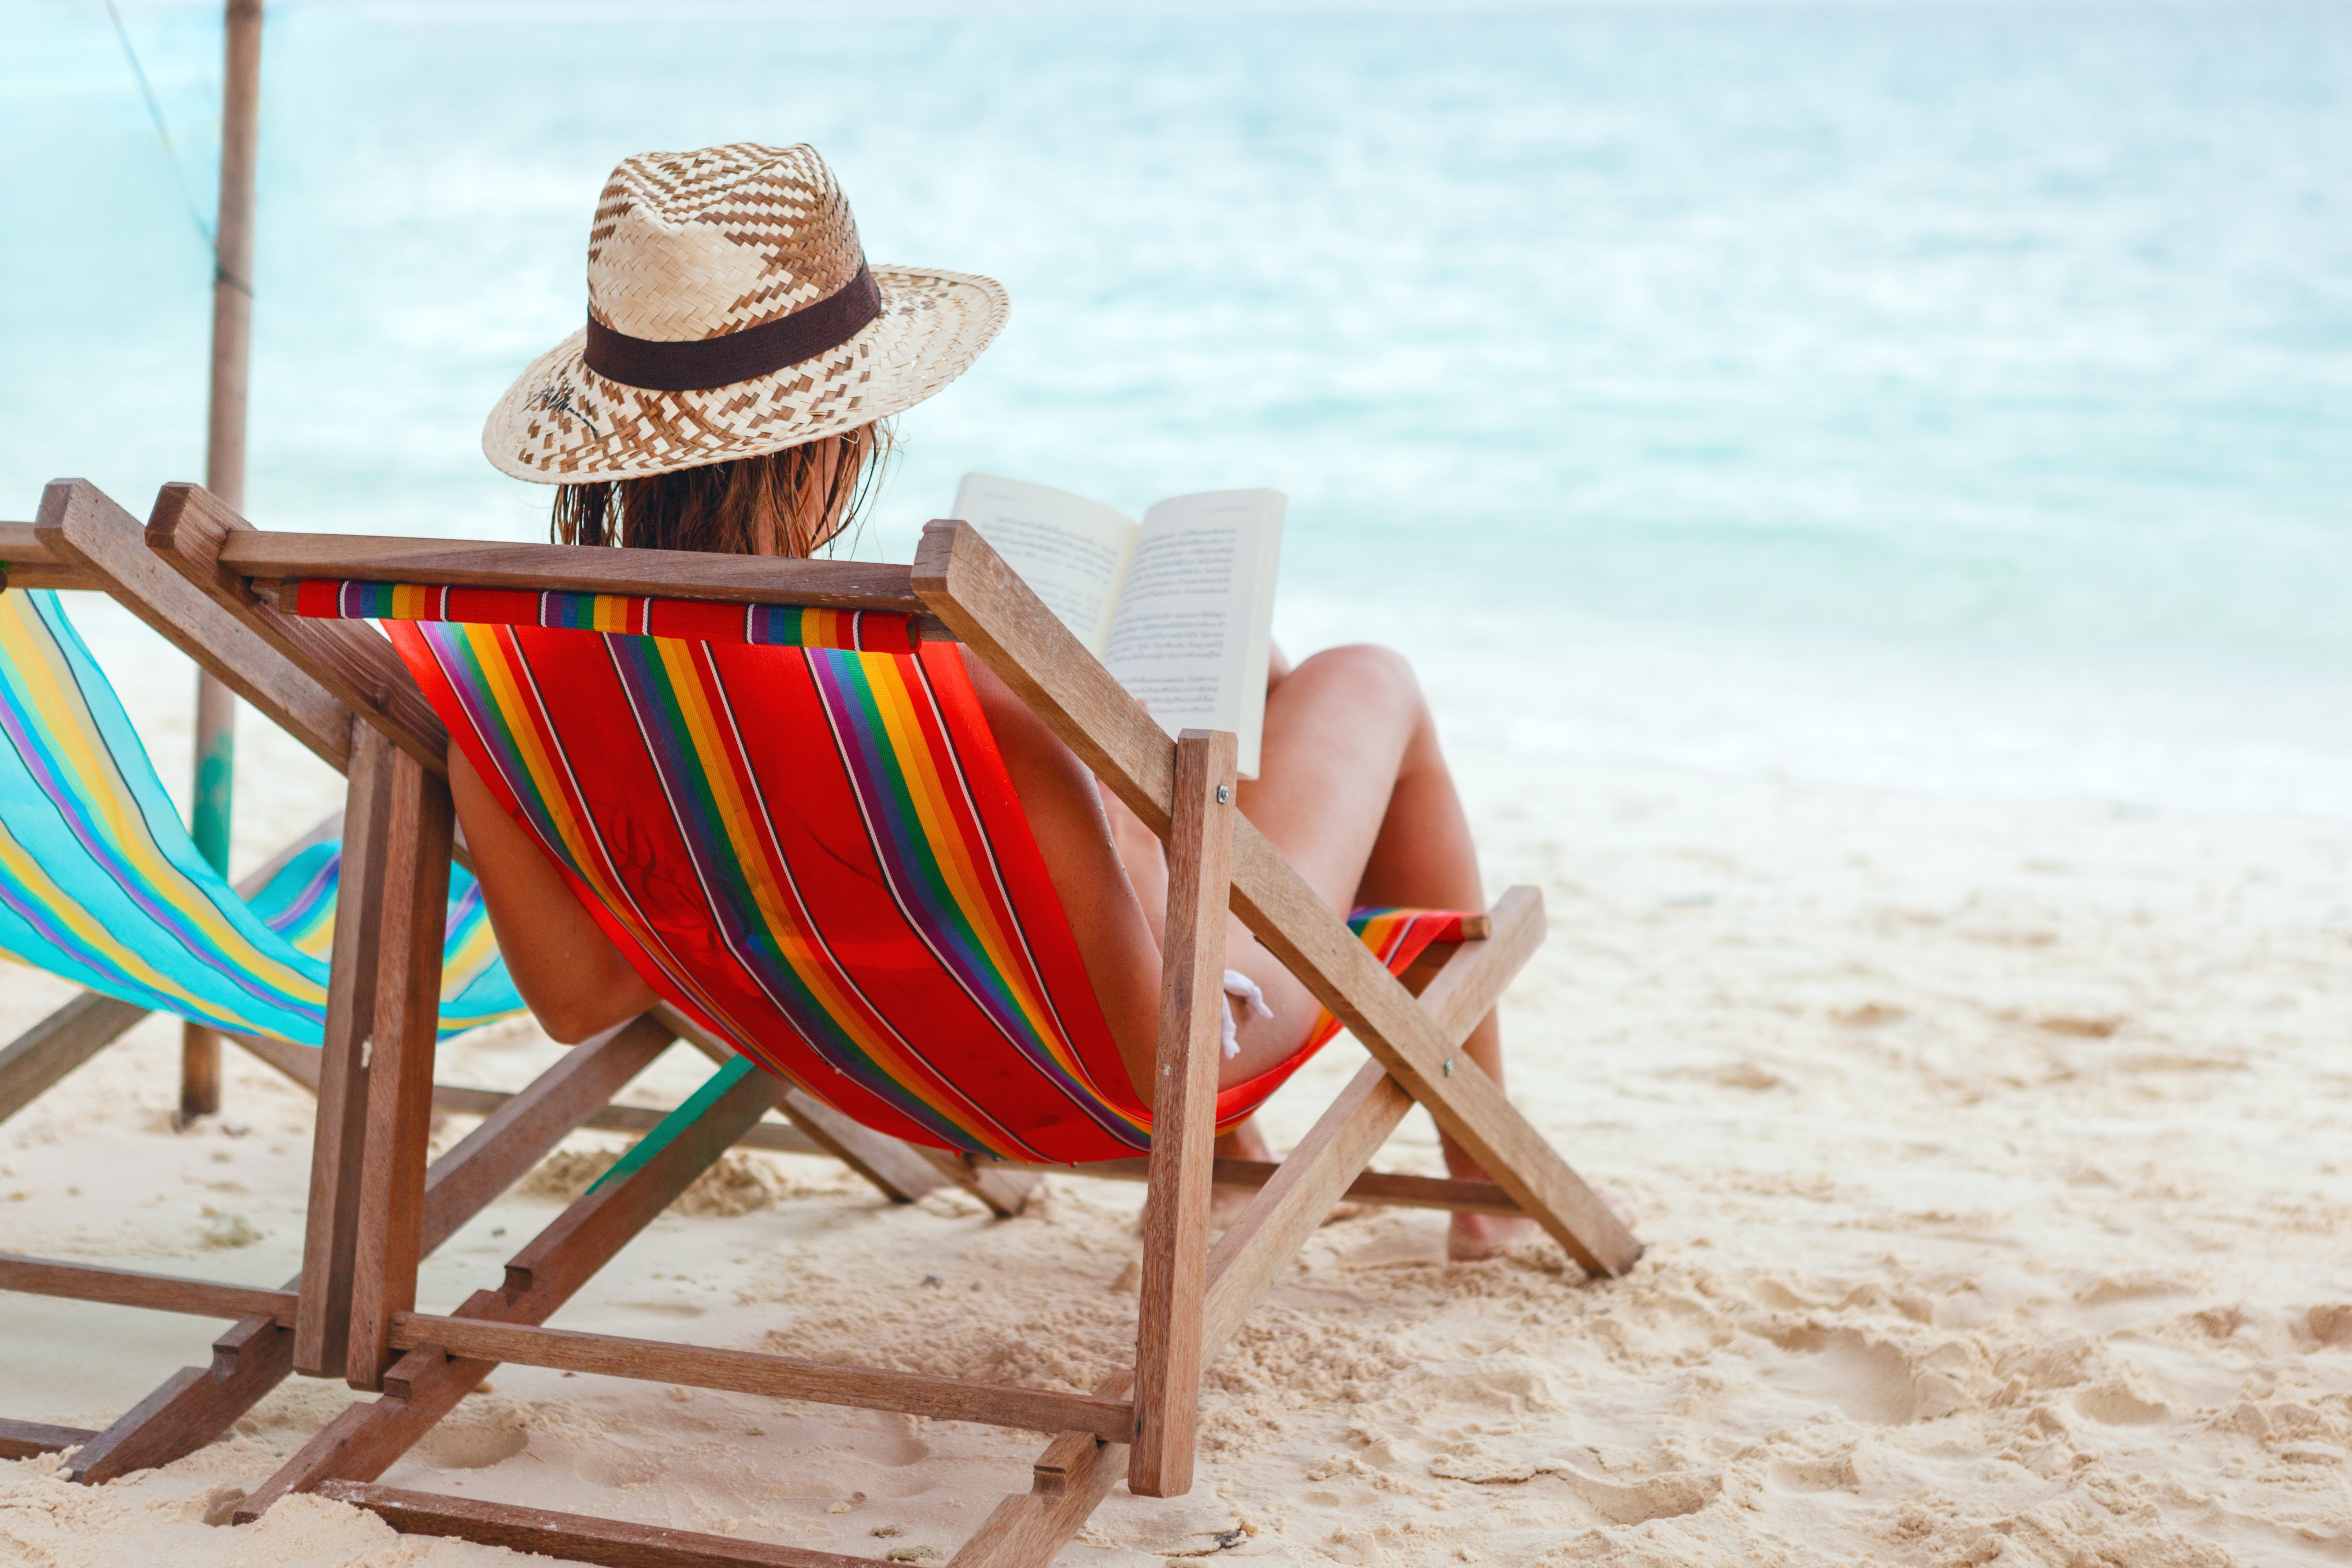 Karen was sitting at the beach reading when she noticed Patricia sitting nearby. | Source: Shutterstock